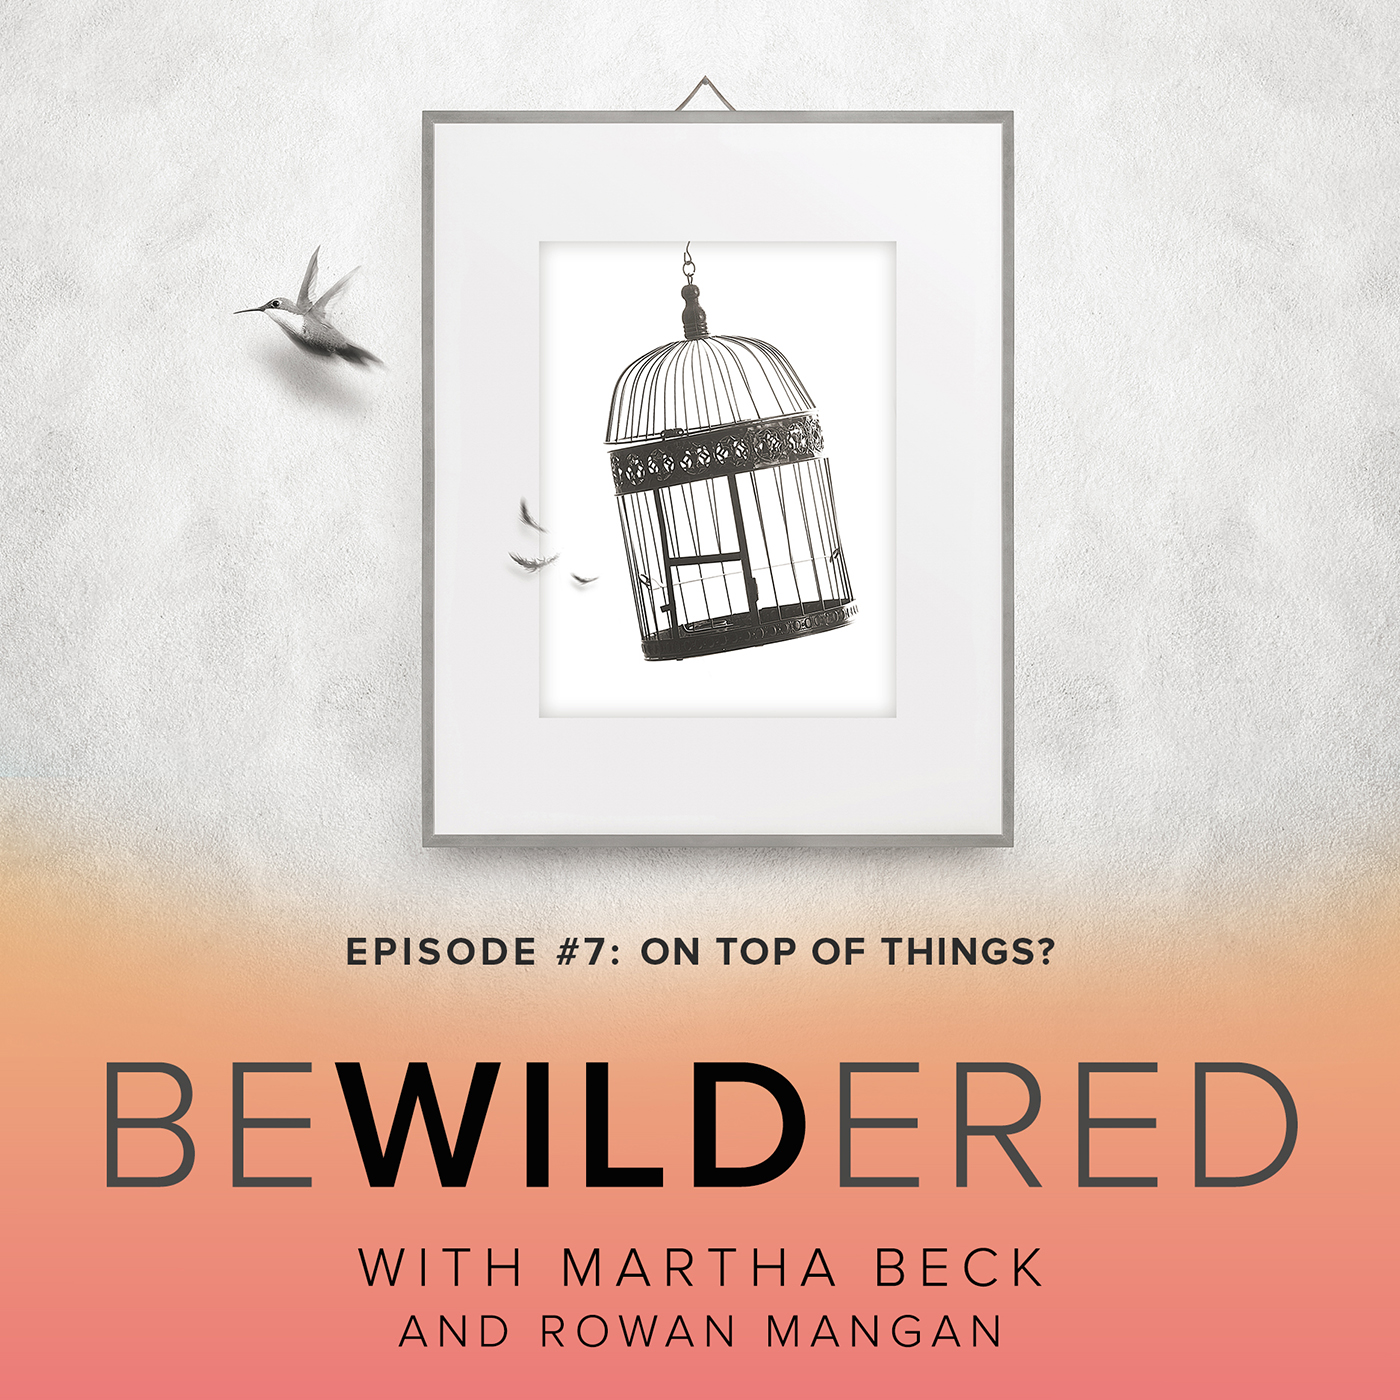 Image for Episode #7 On Top of Things? for the Bewildered Podcast with Martha Beck and Rowan Mangan